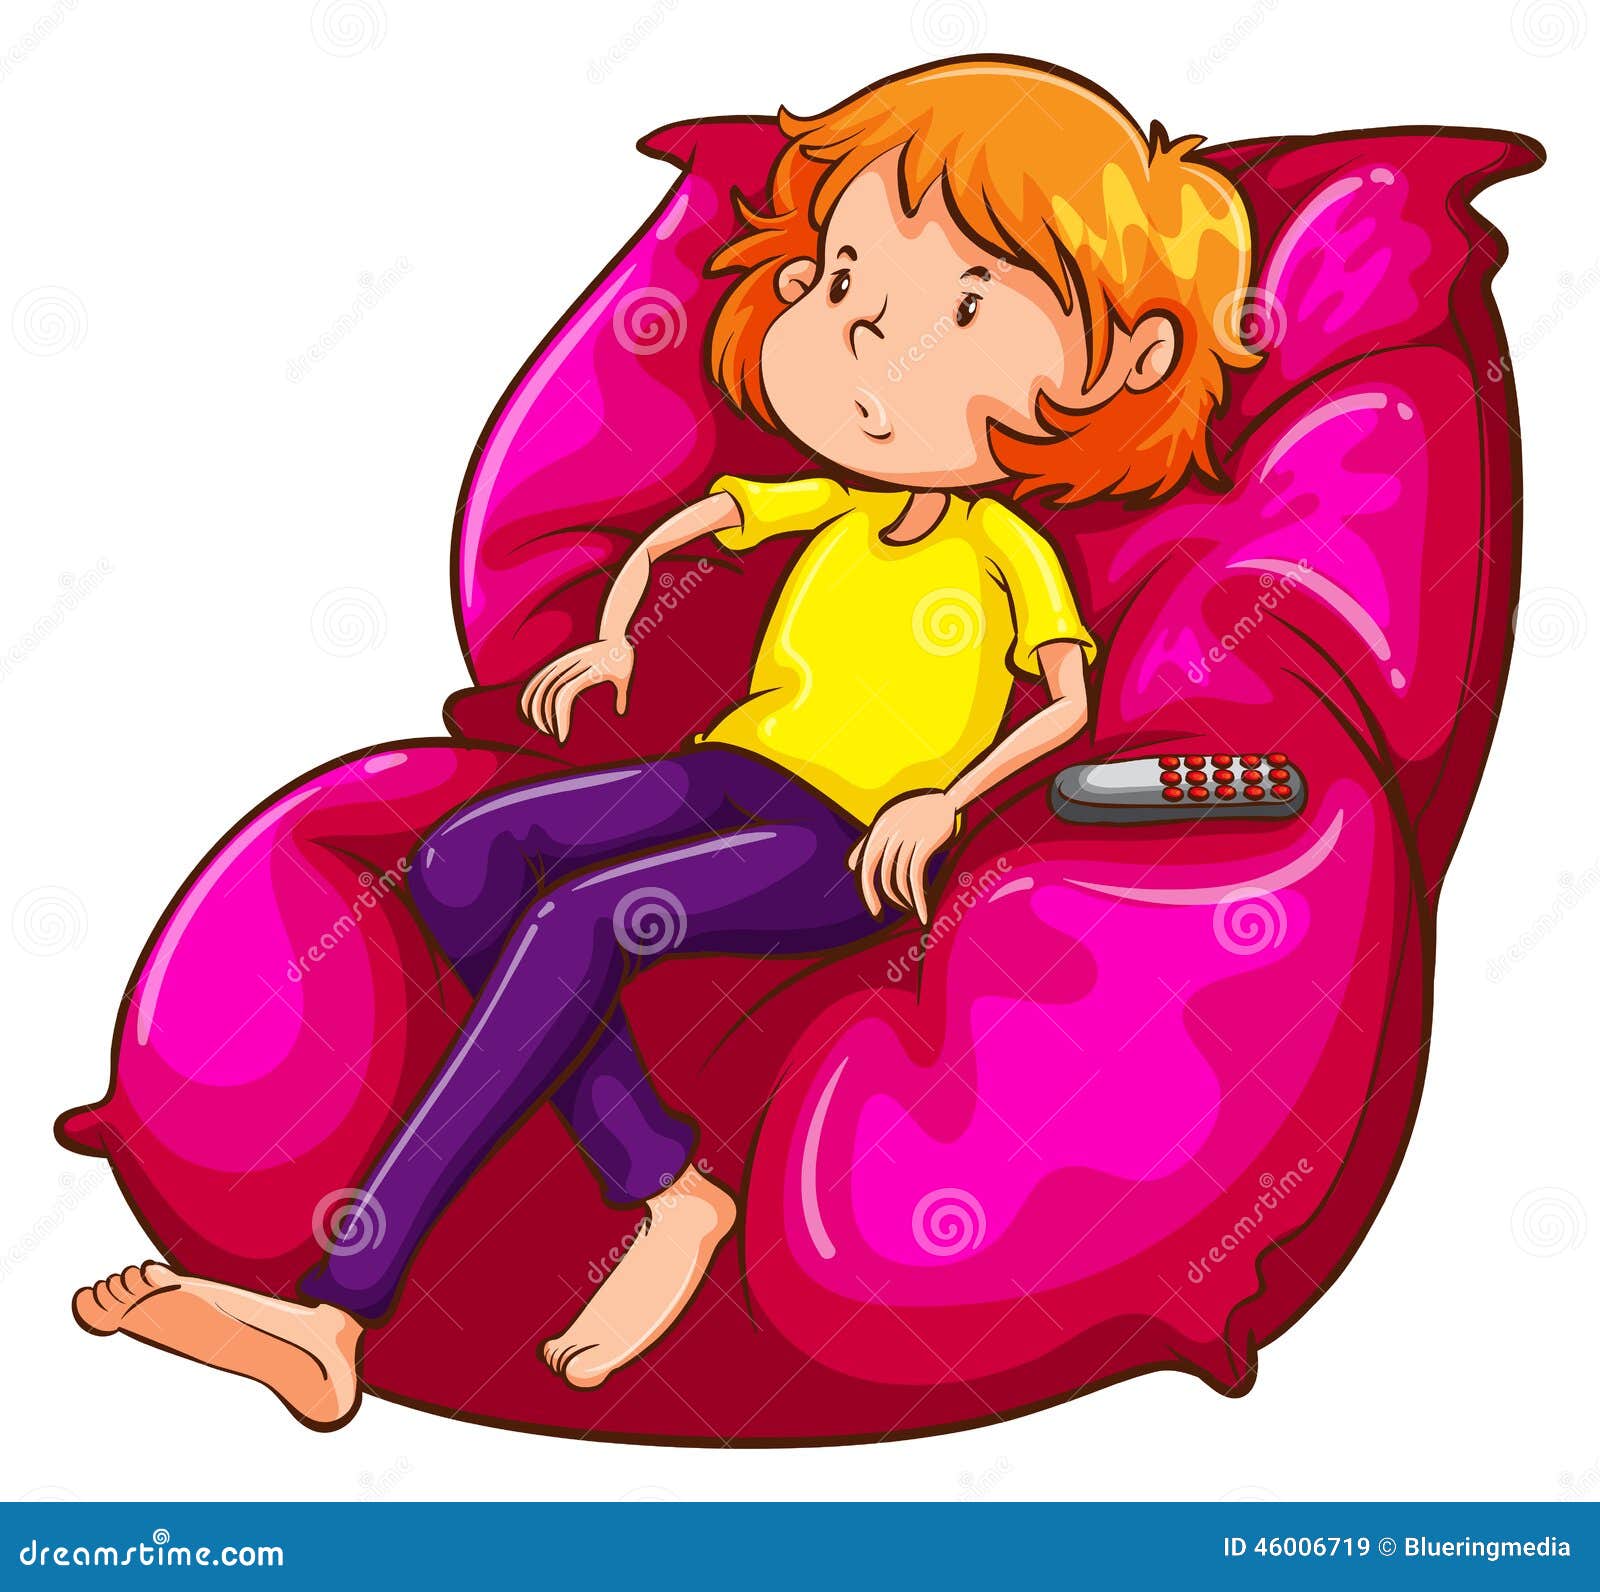 A Sketch of a Lazy Girl at the Couch Stock Vector - Illustration of seat,  lady: 46006719